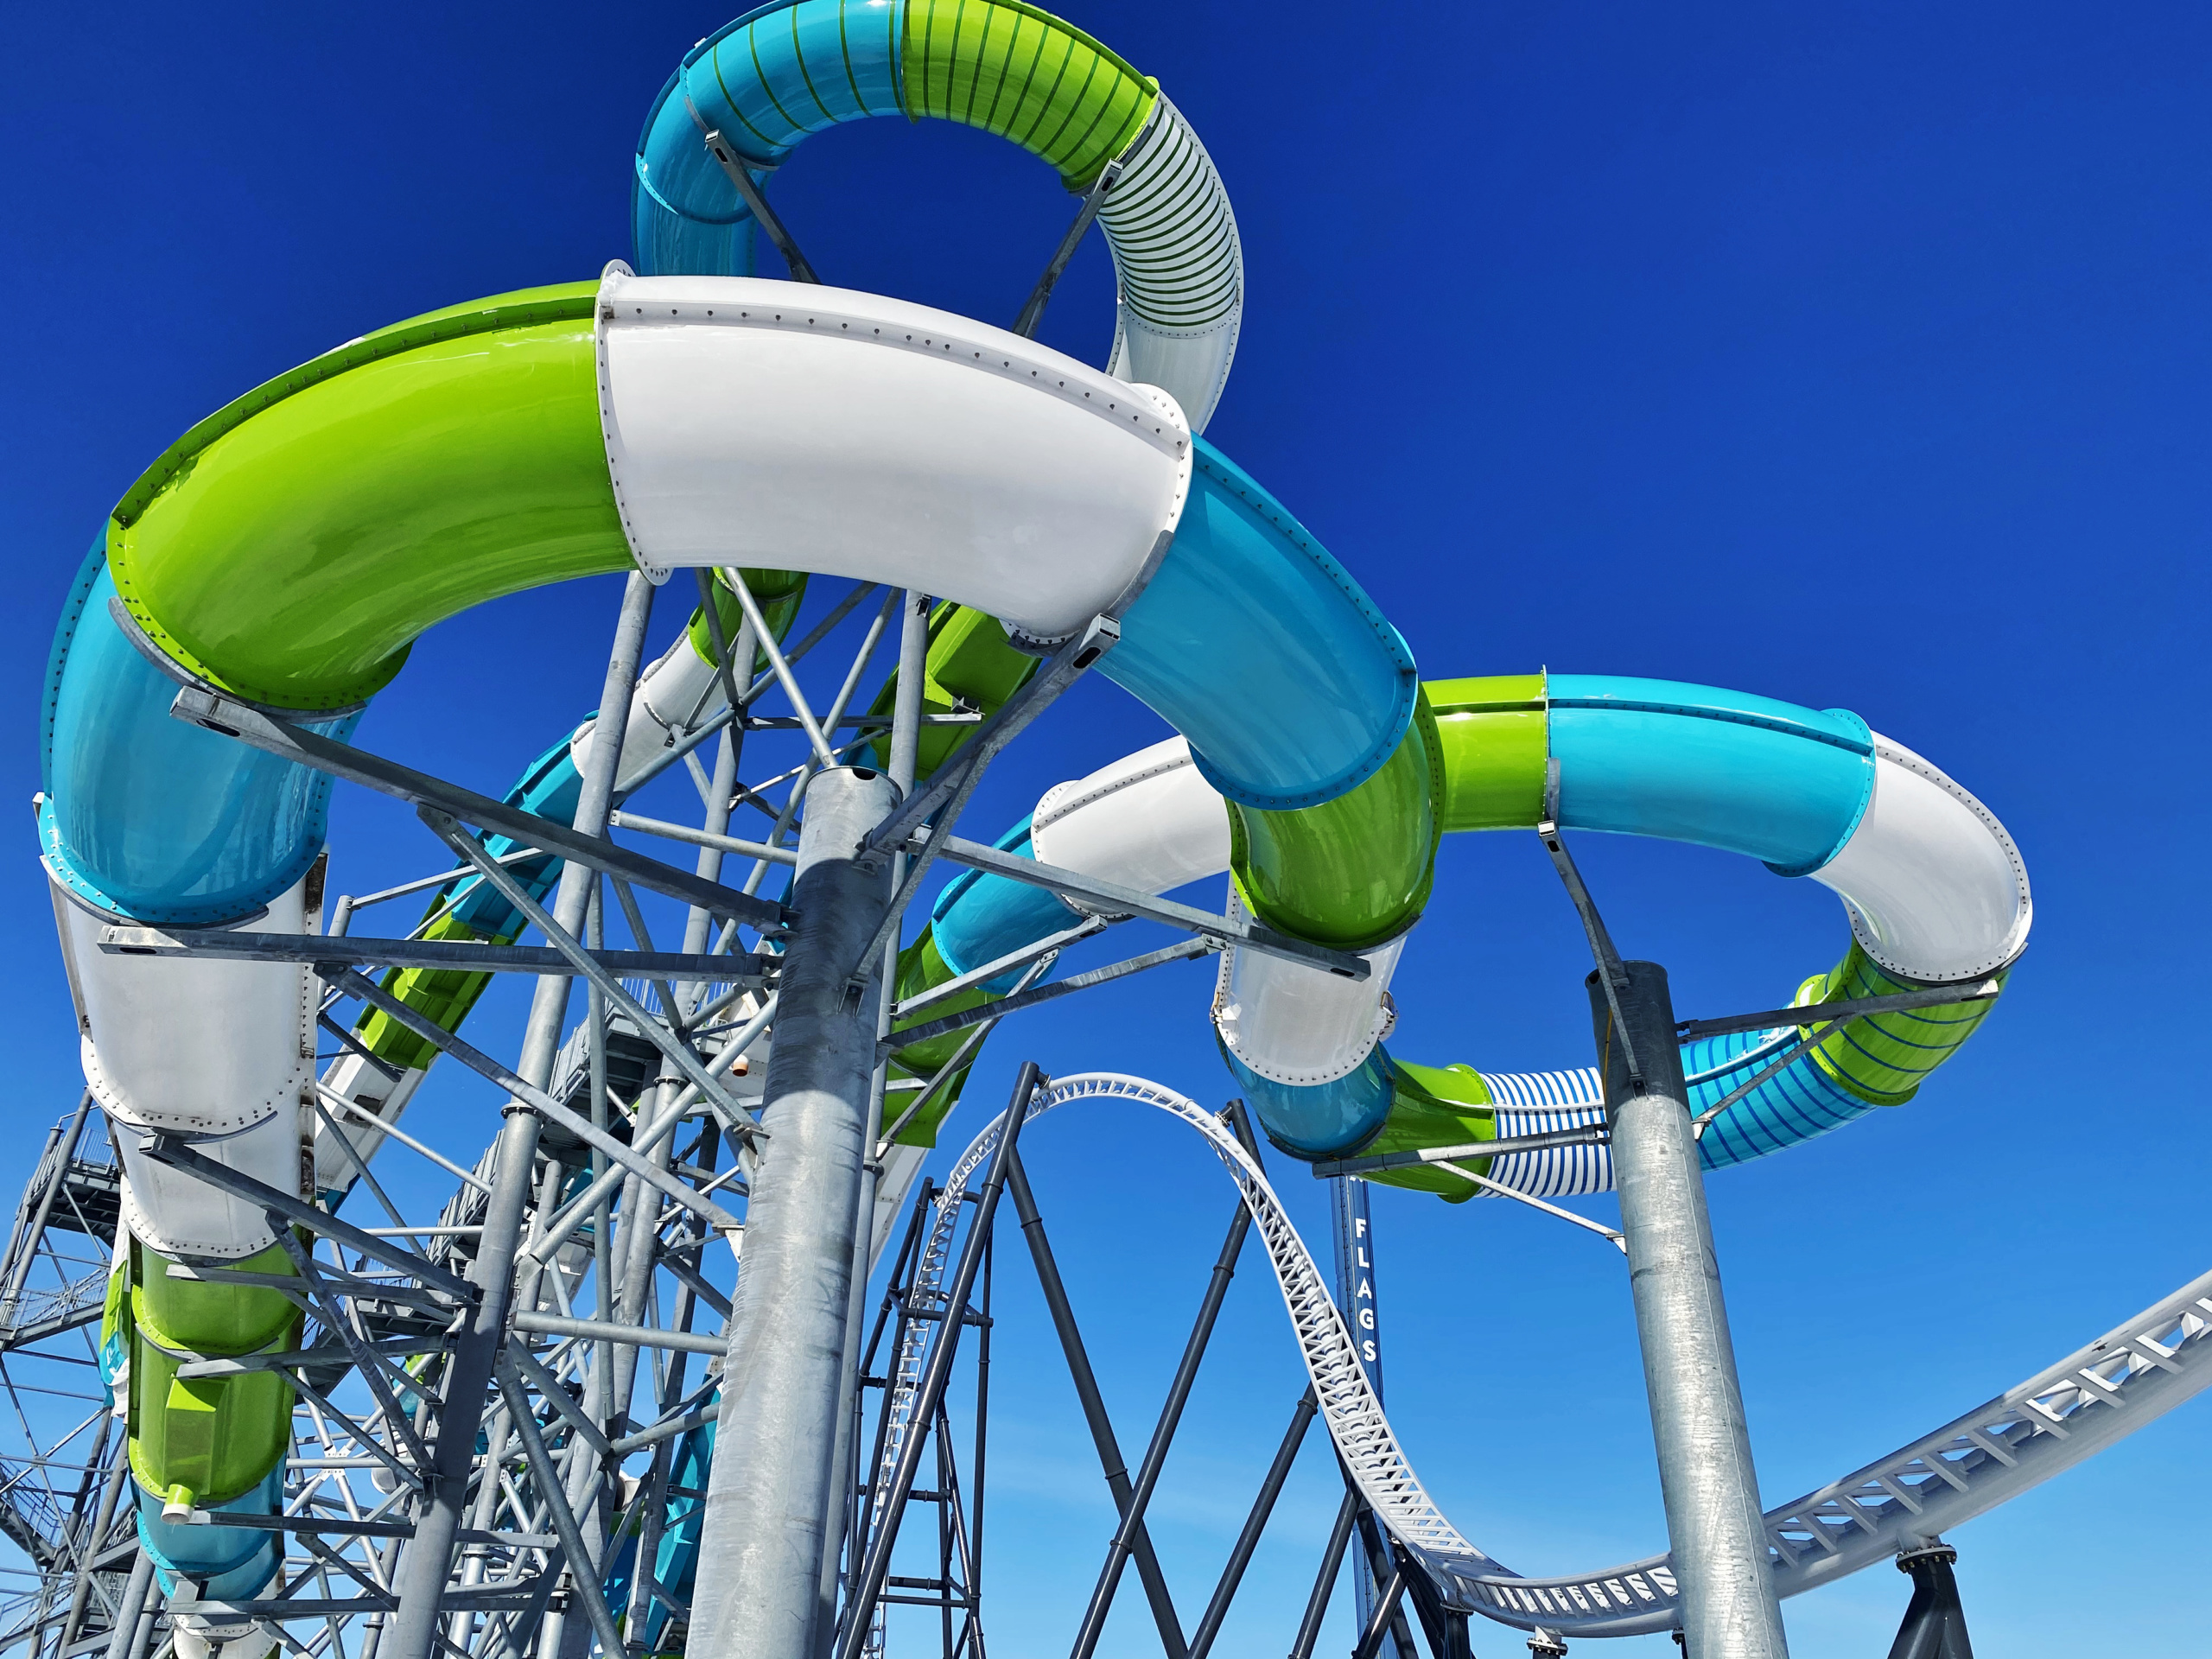 Looking up at outer view of Tsunami Surge water coaster with roller coaster